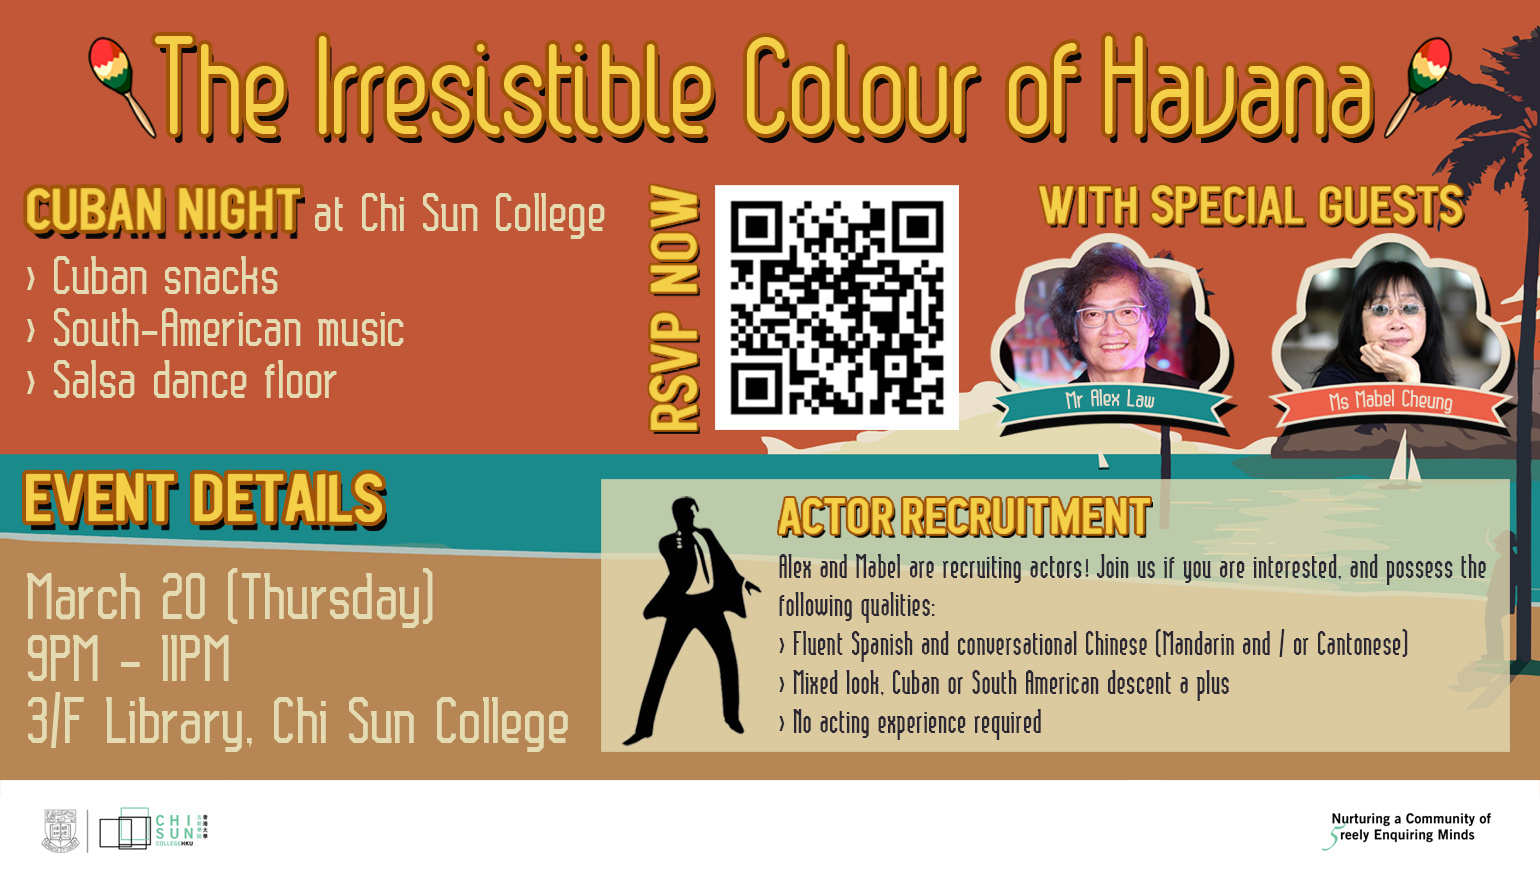 The Irresistible Color of Havana - Cuban Night at Chi Sun College